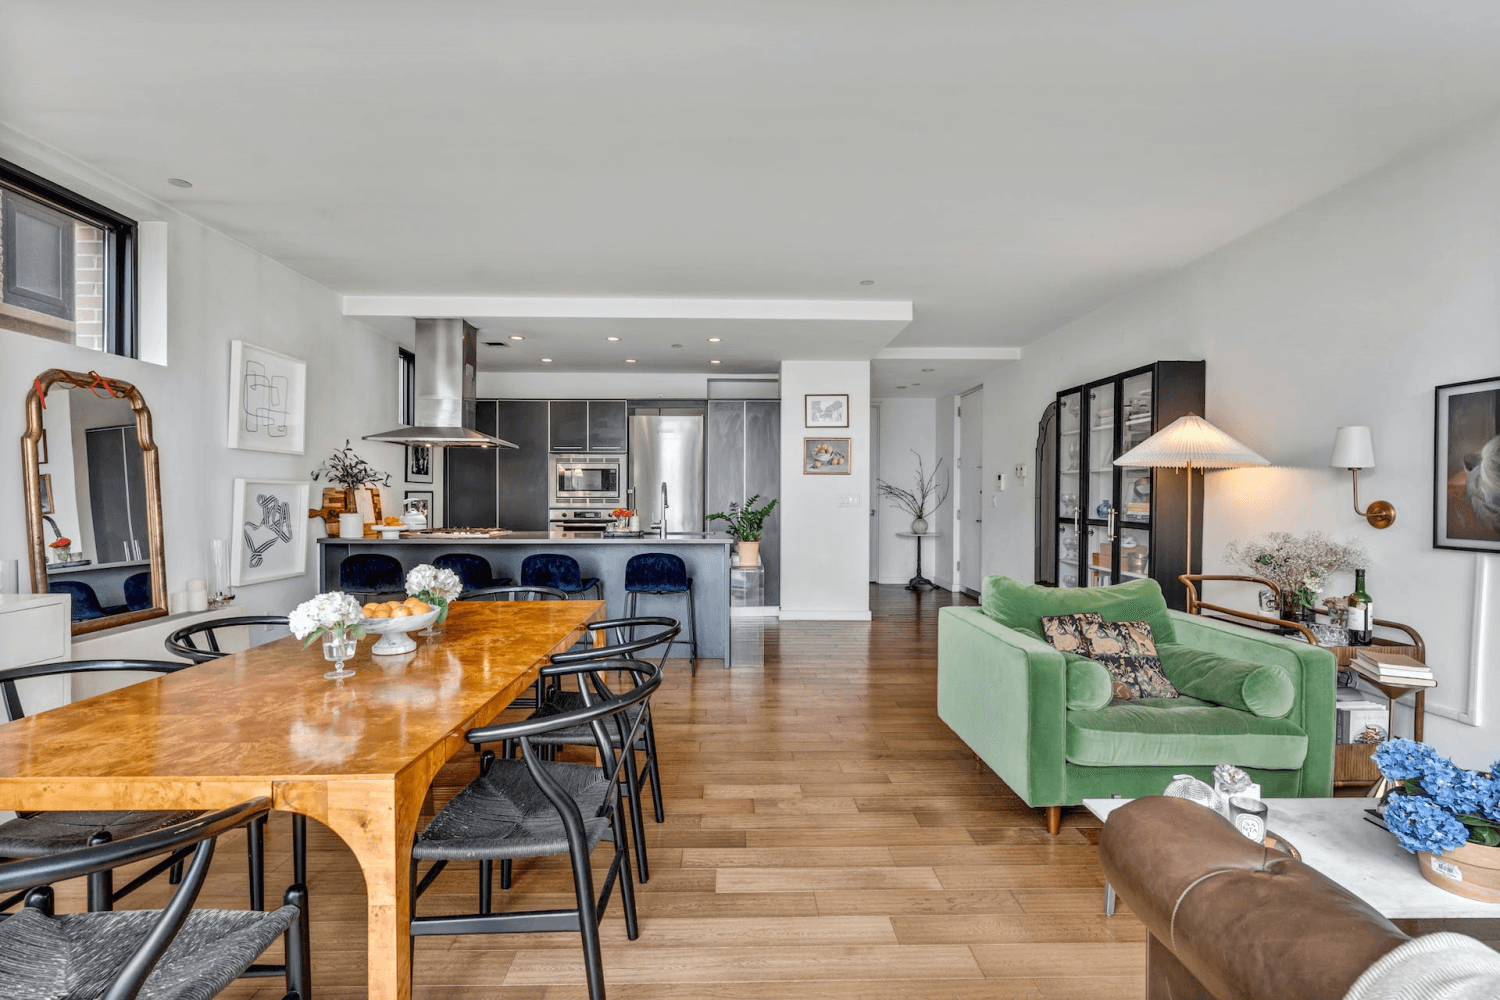 This beautiful and spacious 880 SF one bedroom is located on the corner of North 10th and Berry Street, in the sought after Northside of Williamsburg.